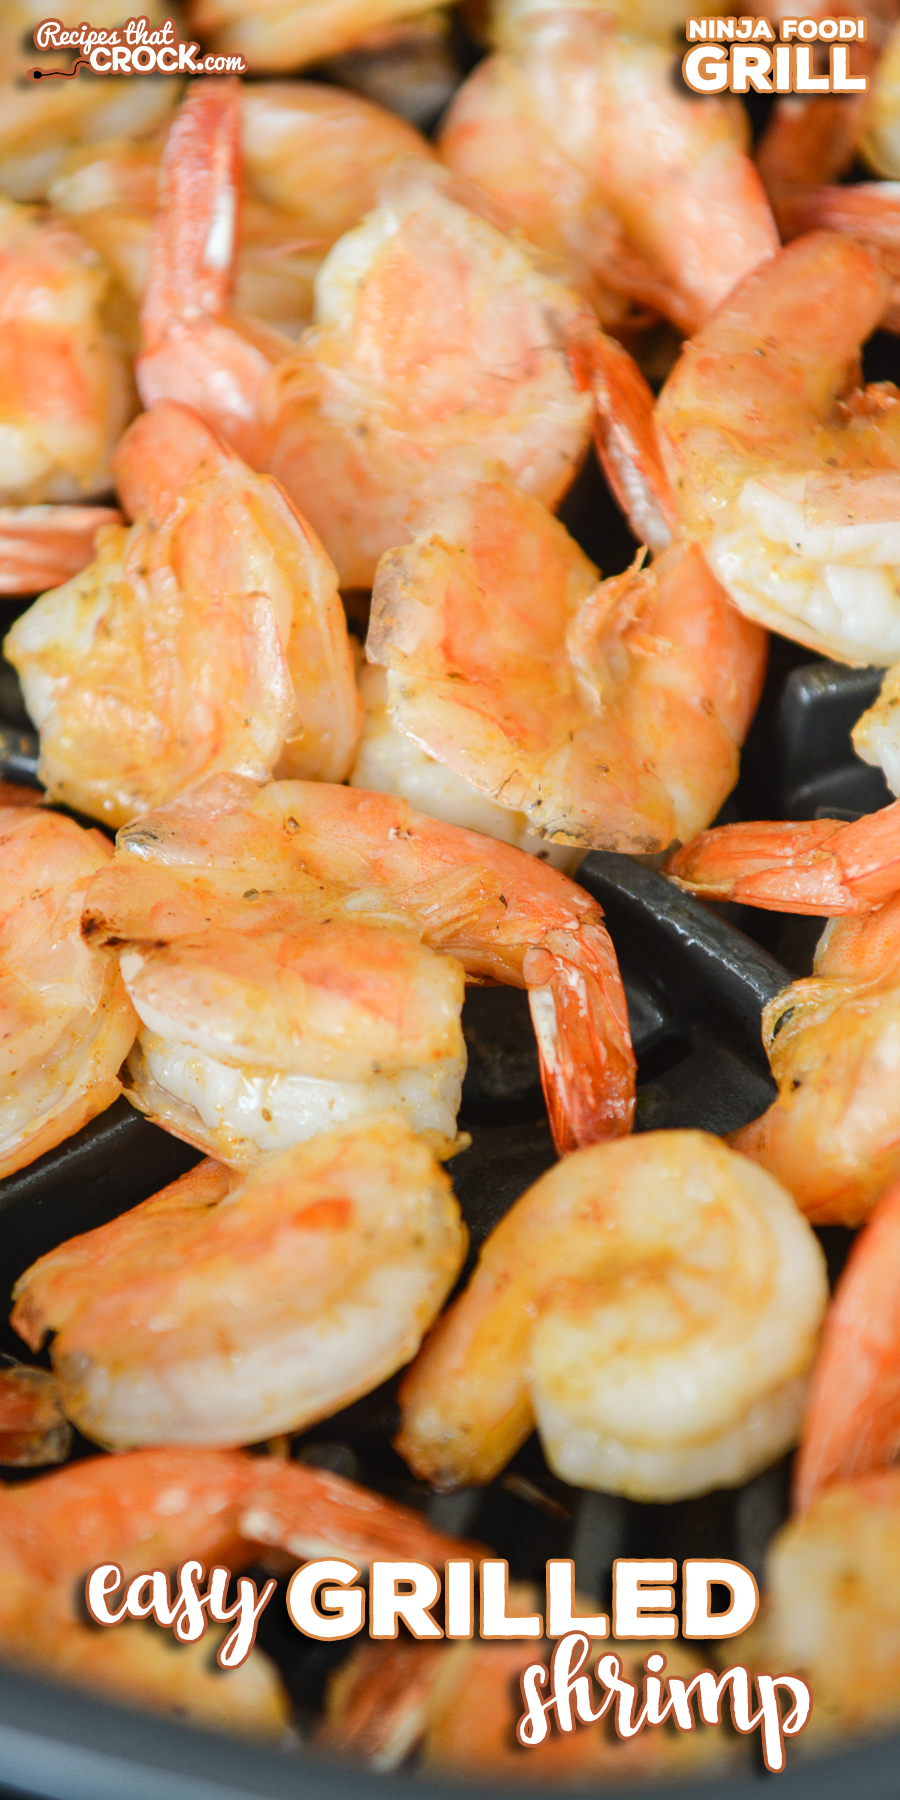 Do you love grilled shrimp and want an easy recipe to make it at home? Our Easy Grilled Shrimp couldn't be simpler. Cook on your traditional outdoor grill or Ninja Foodi Grill. via @recipescrock